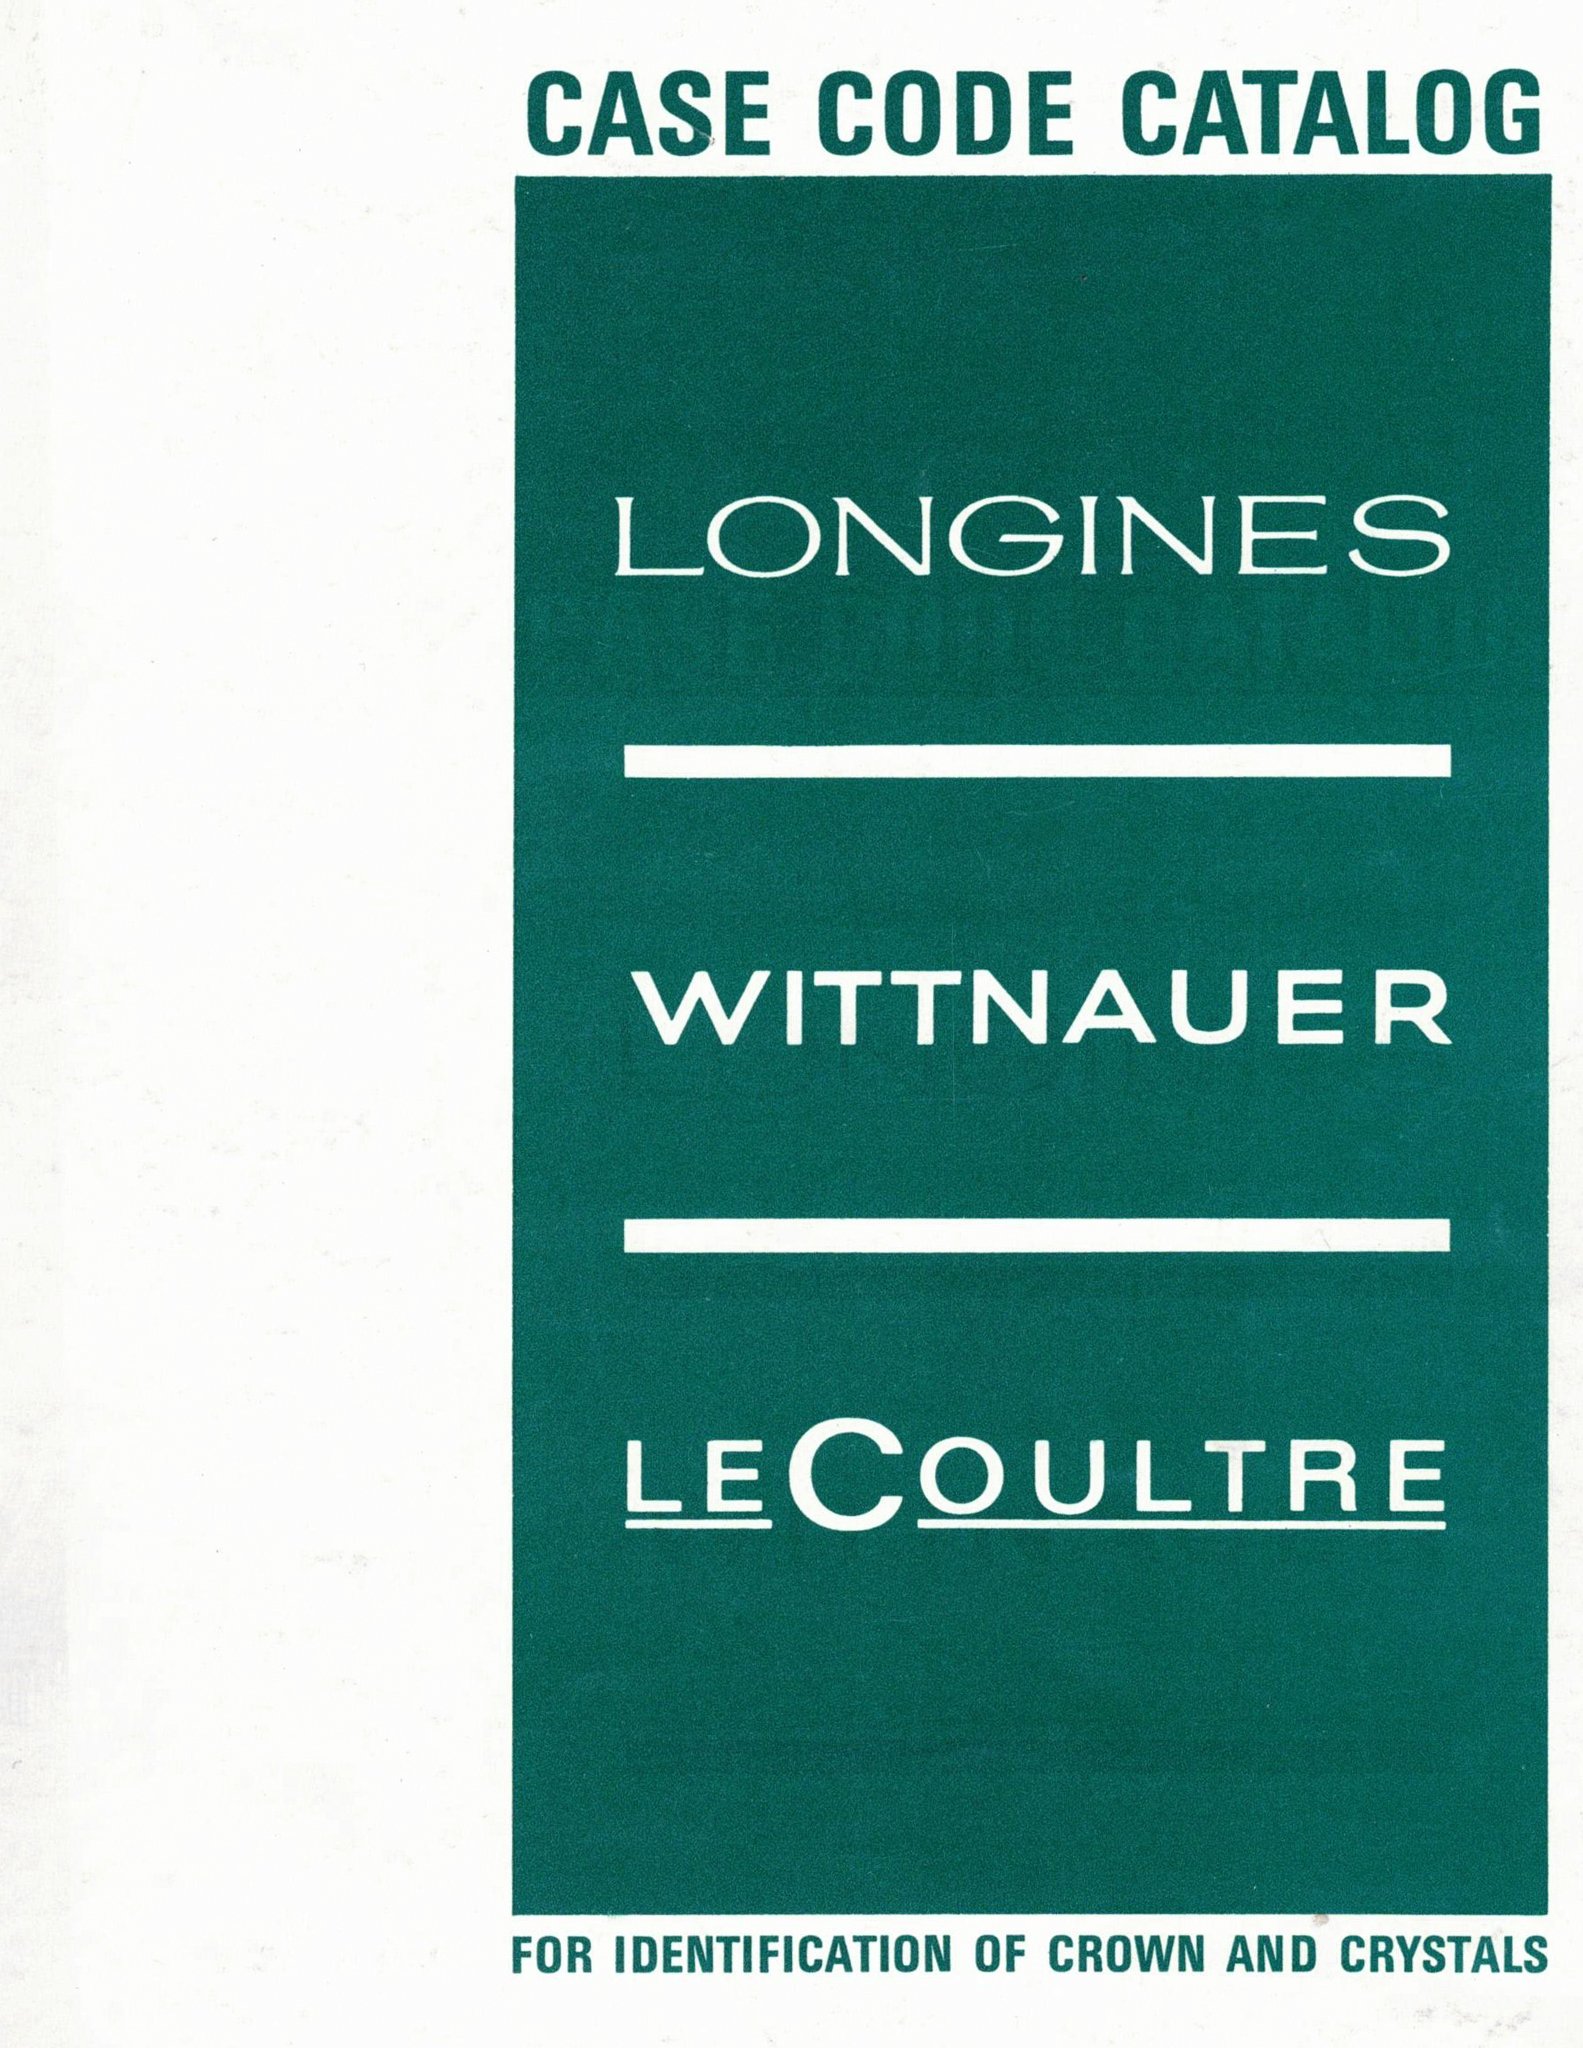 Case Code Catalog For Longines, Wittnauer, LeCoultre